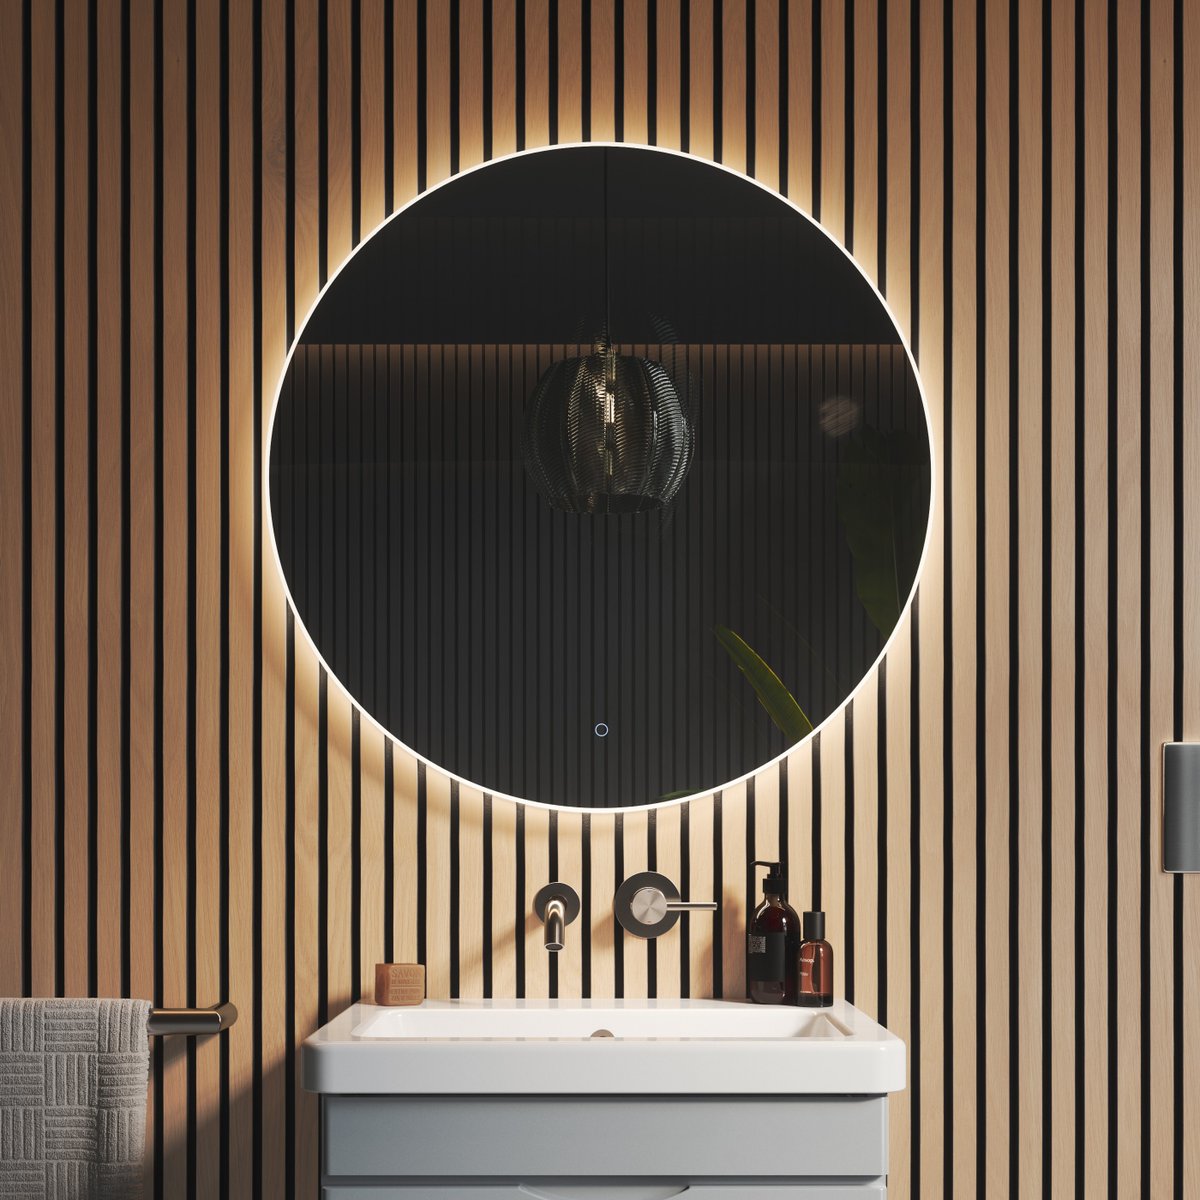 The OSKA round mirror collection offers both beauty and practicality.

The soft ambient back glow is harmonised together with clean forward facing task lighting to enhance your bathroom experience. 

#saneux #bathroomforlife #ModernBathroom #SleekDesign #ContemporaryDecor